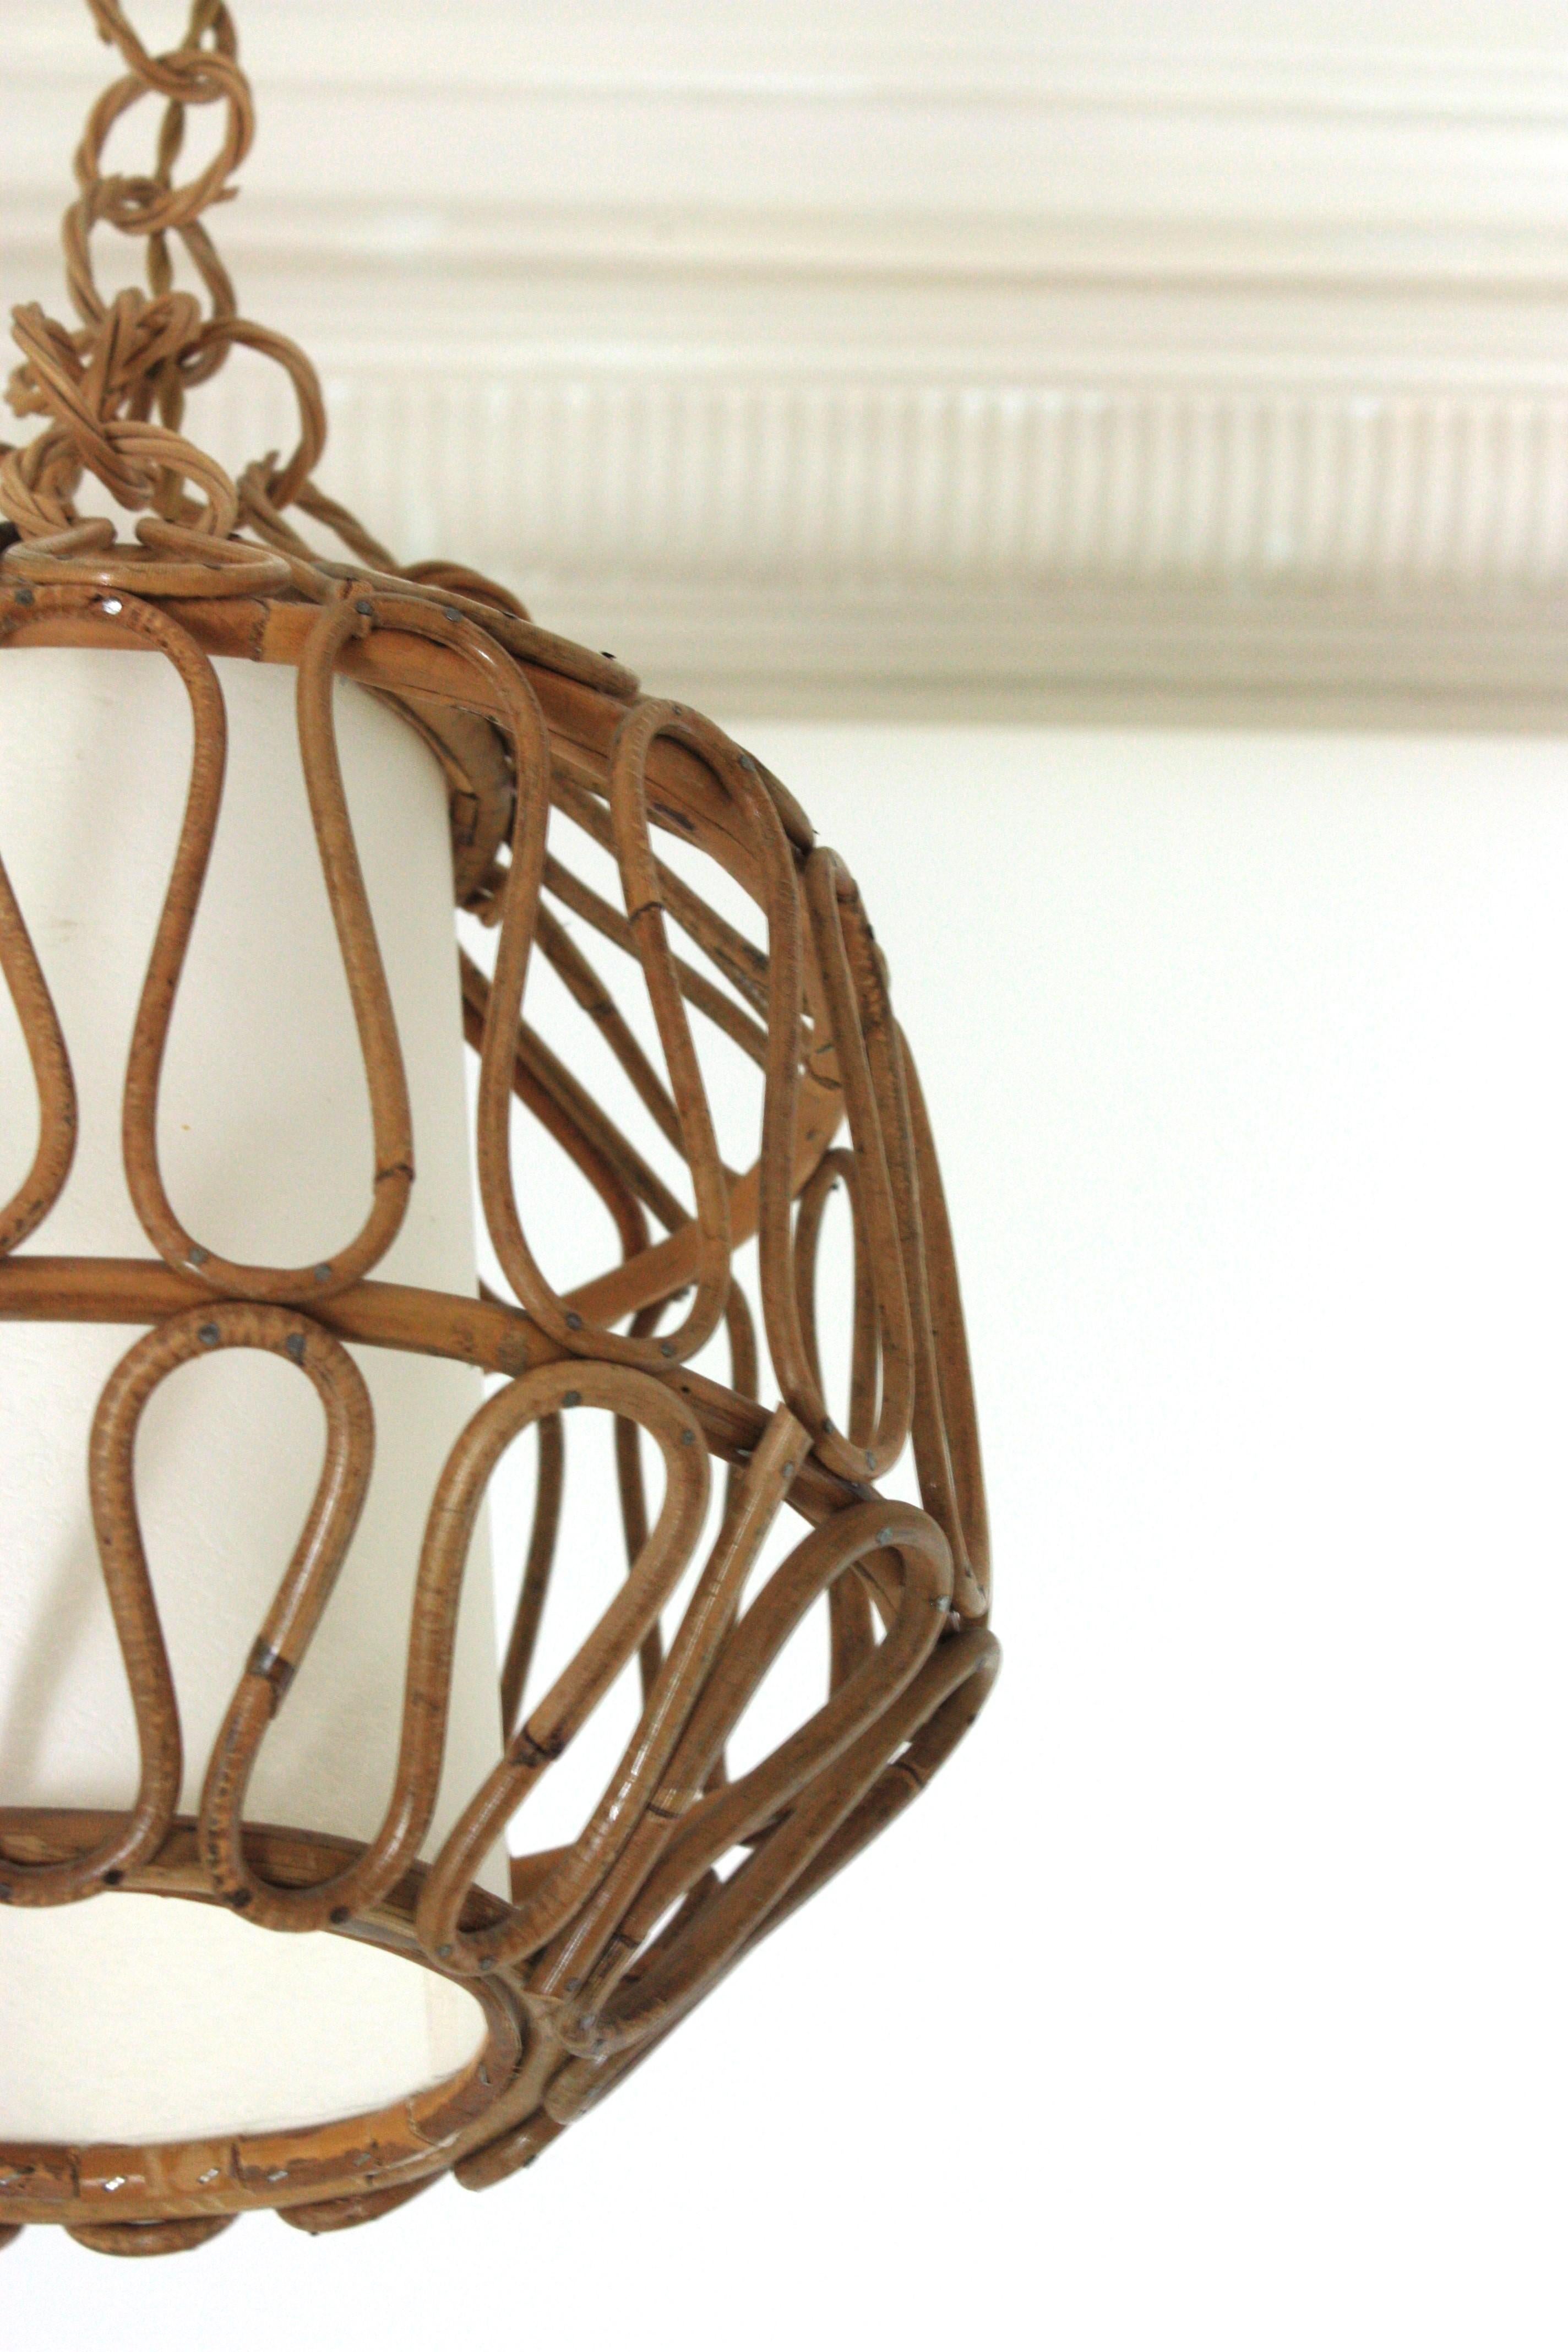 Rattan Globe Pendant Light or Lantern with Loop Details, Spain, 1960s For Sale 7